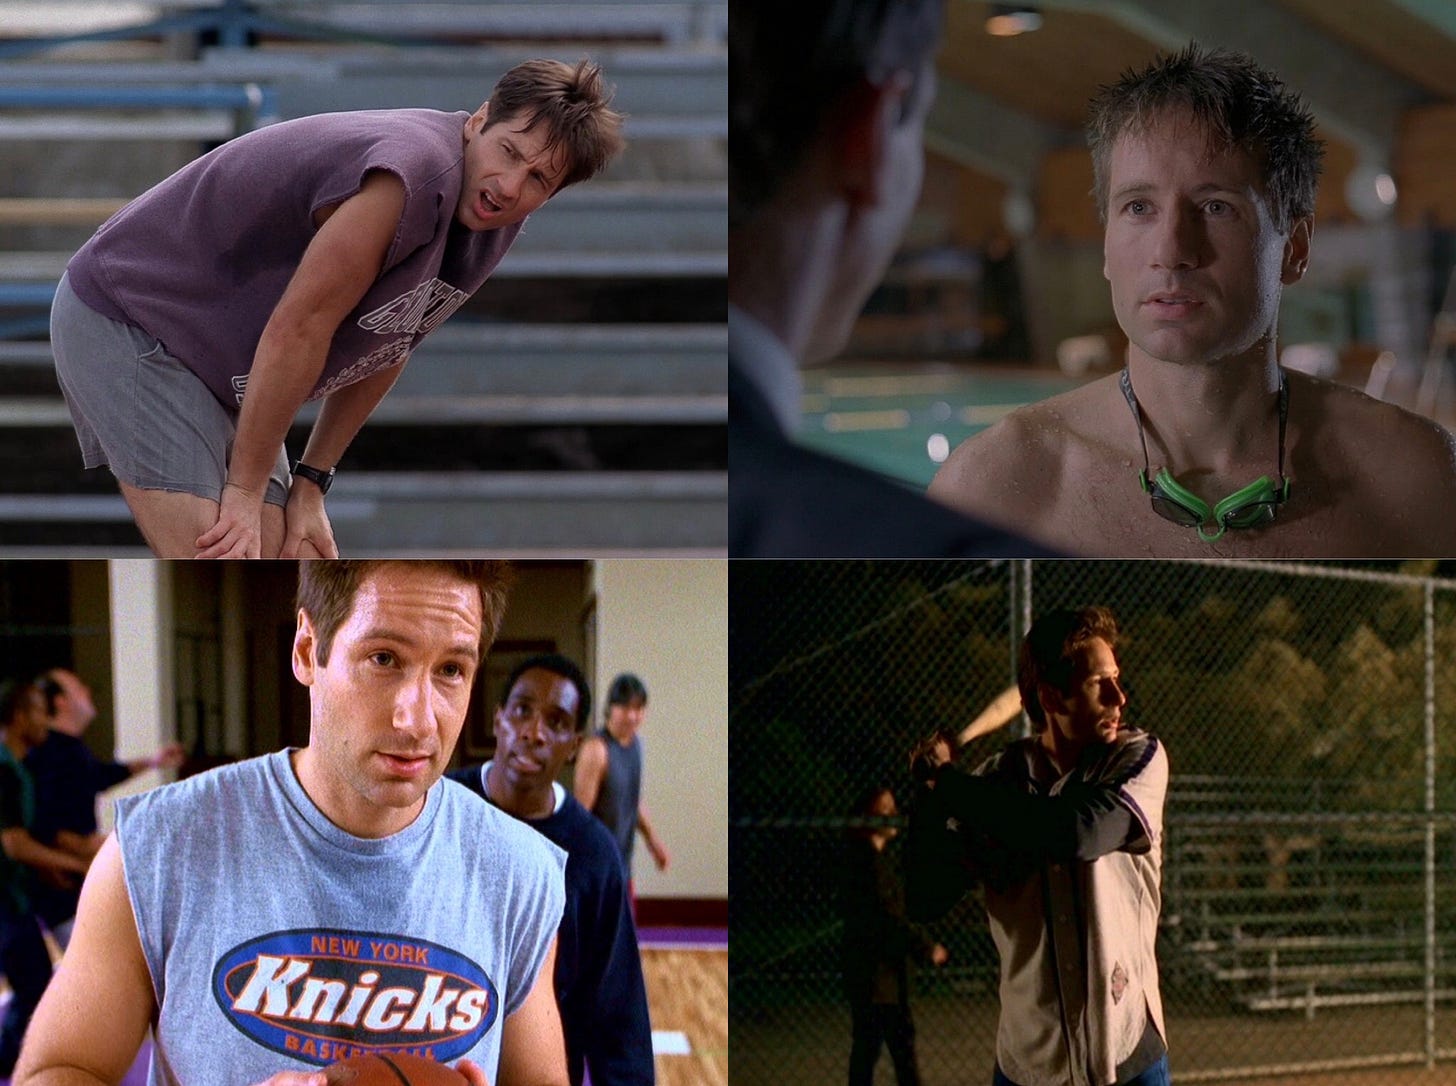 Four images, clockwise from top left: Mulder leaning over, out of breath, in an old t-shirt; Mulder, looking concerned and topless with swimming goggles around his neck; Mulder, playing baseball in the dark; Mulder, in a Knicks shirt looking determined while playing basketball